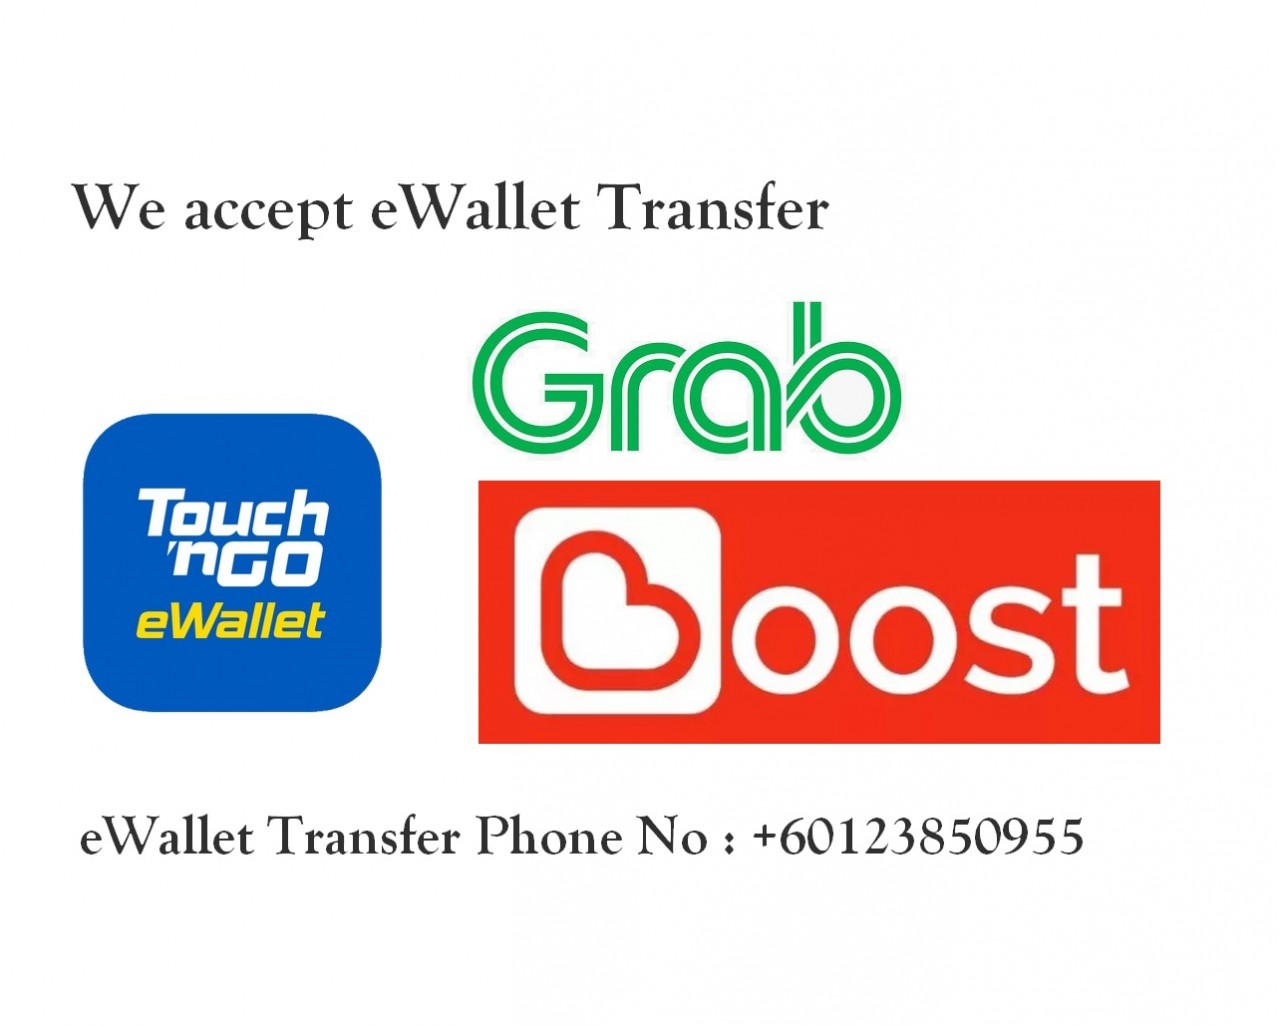 We accept eWallet transfer payment for your order